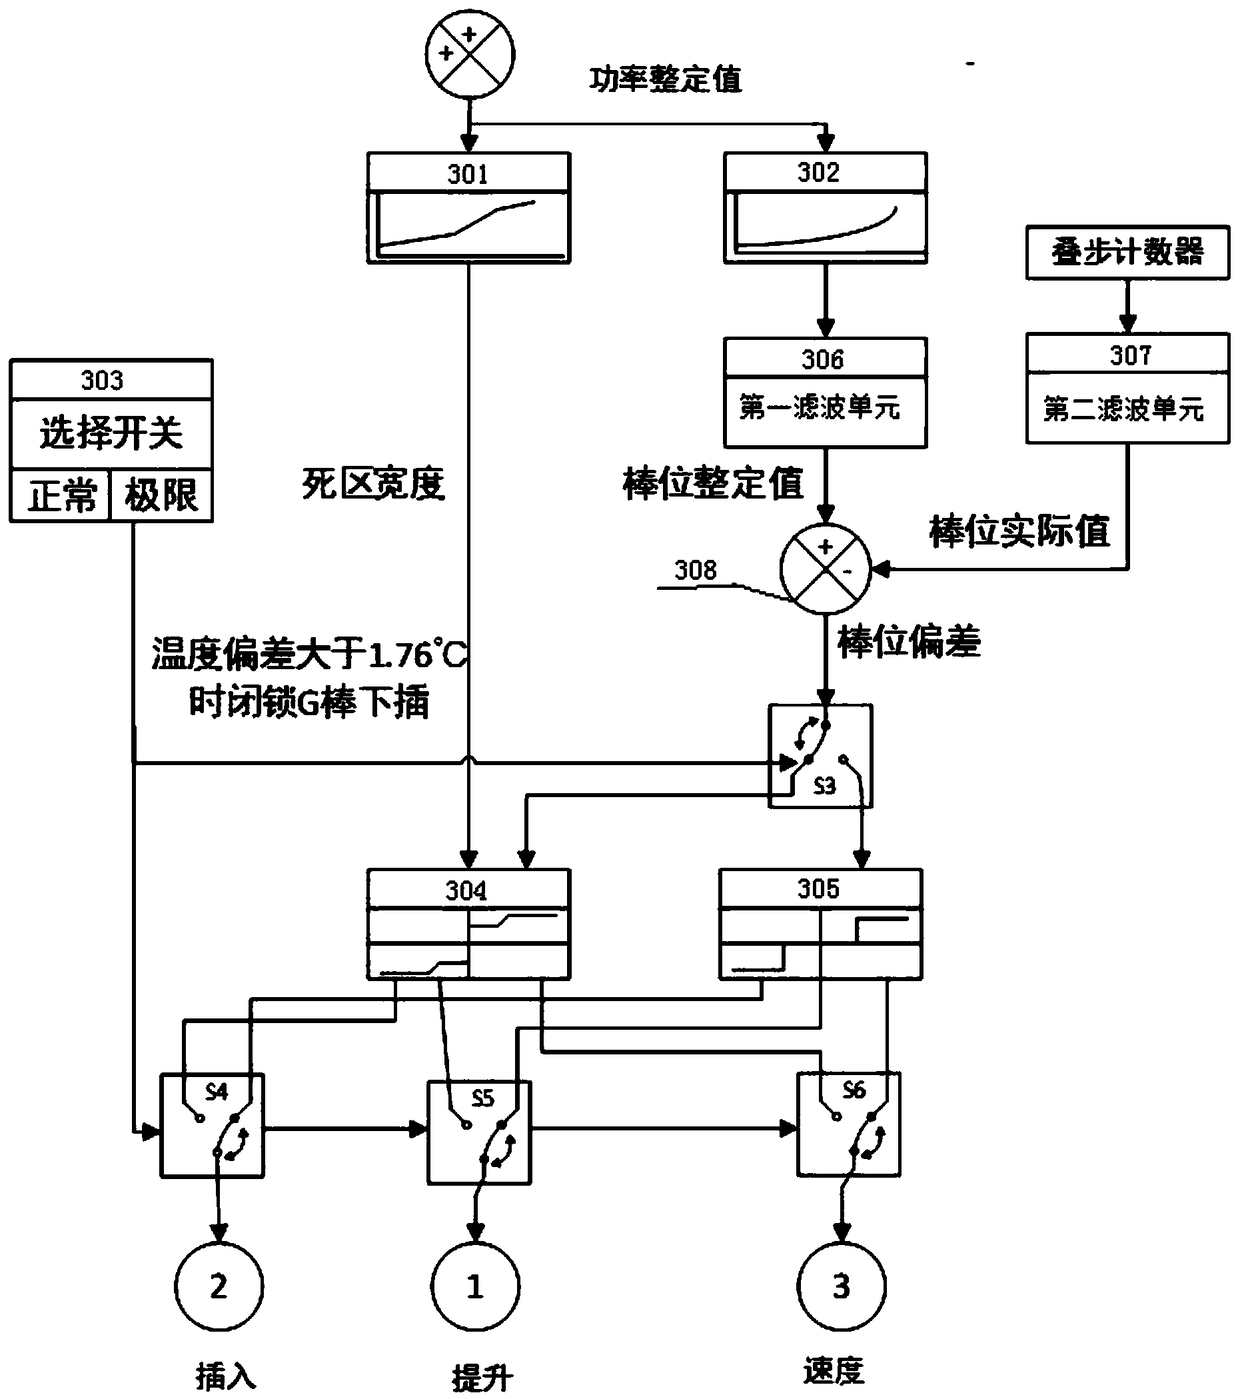 A nuclear power unit simulation model comprising a power control system